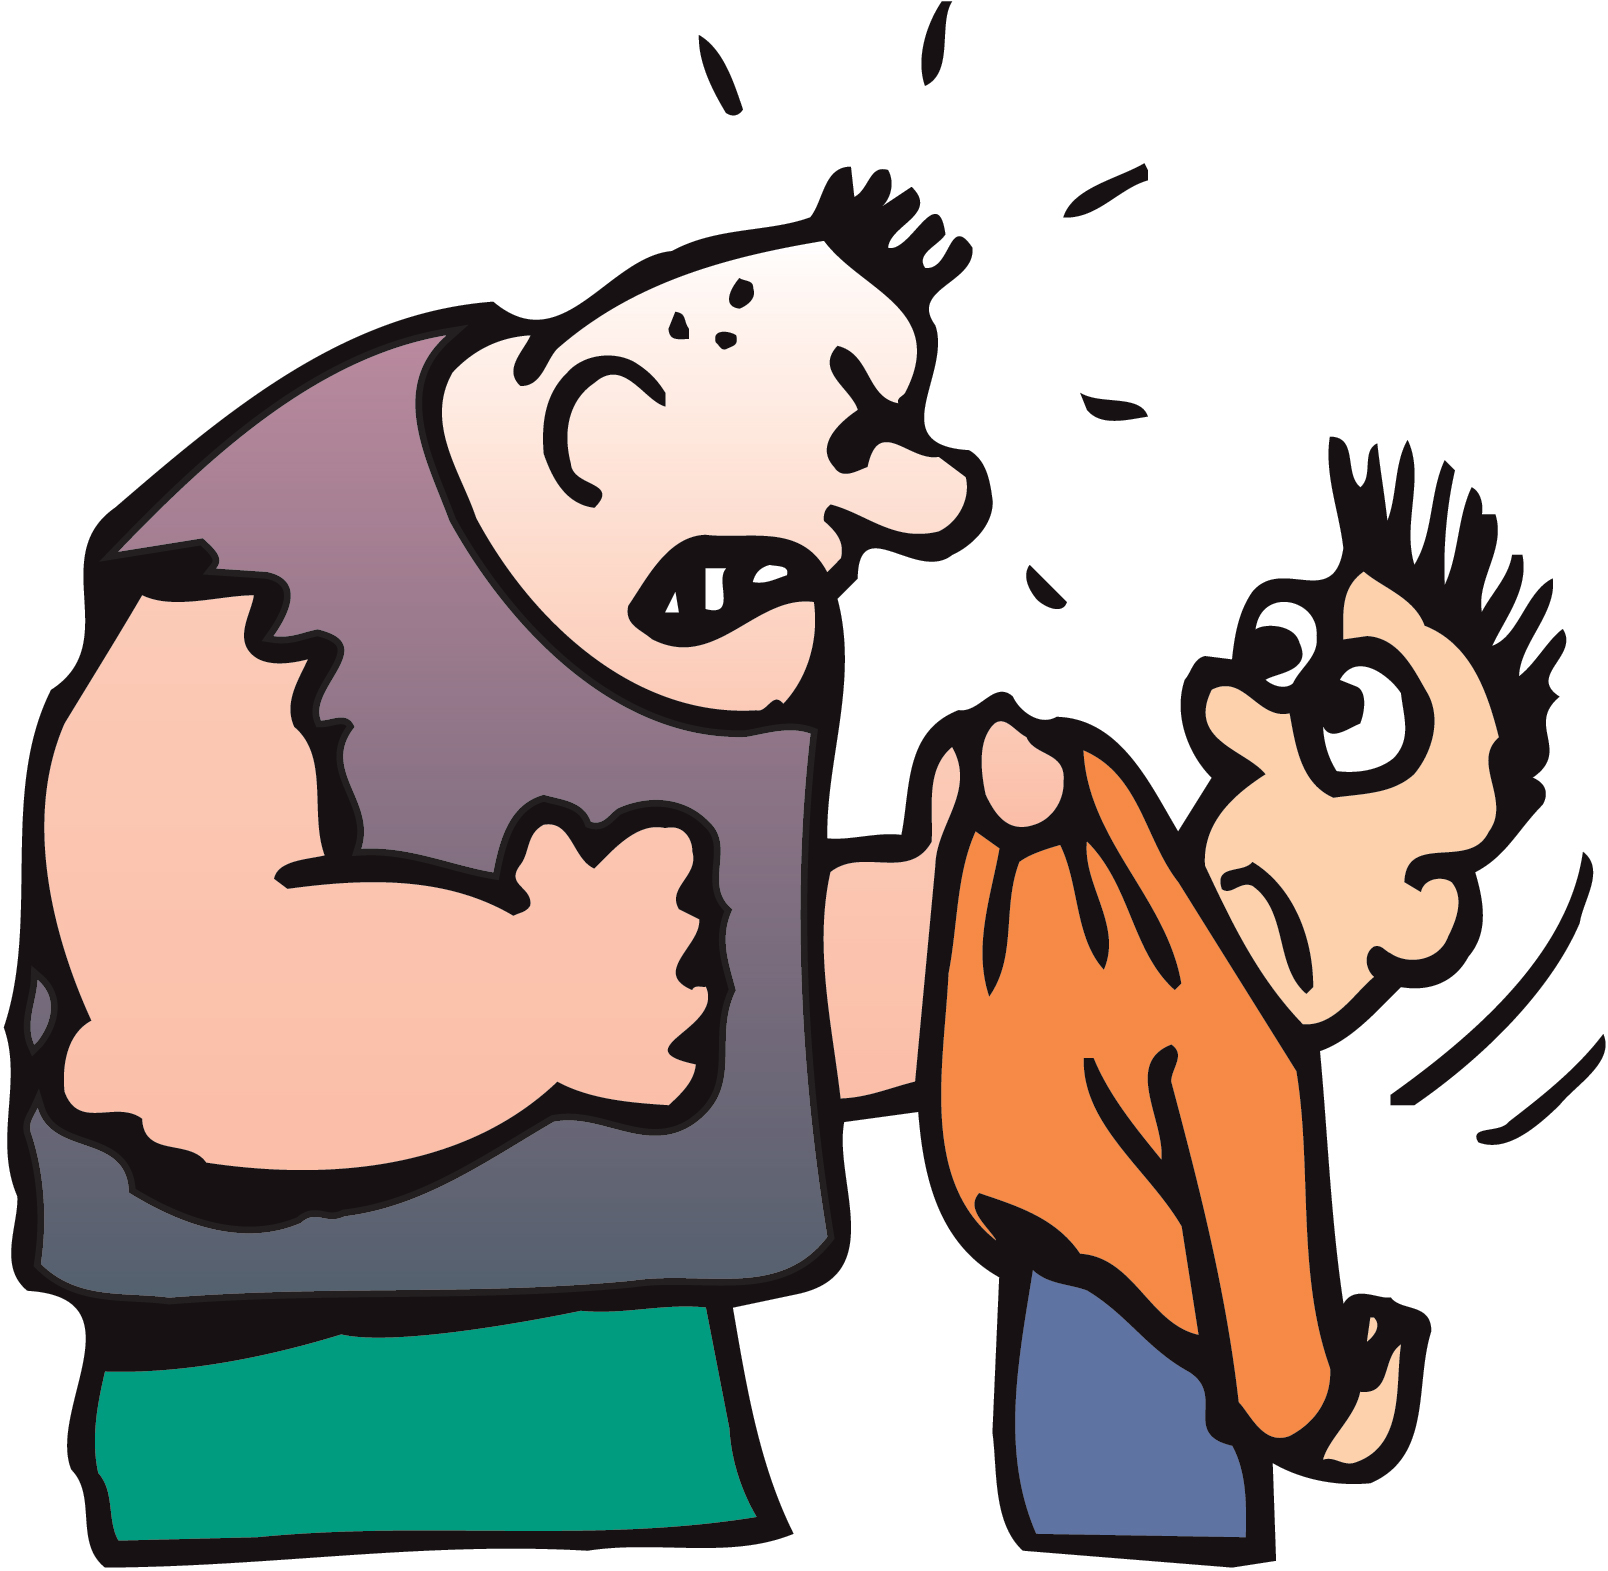 Cartoon Bully Pictures | Free Download Clip Art | Free Clip Art ...